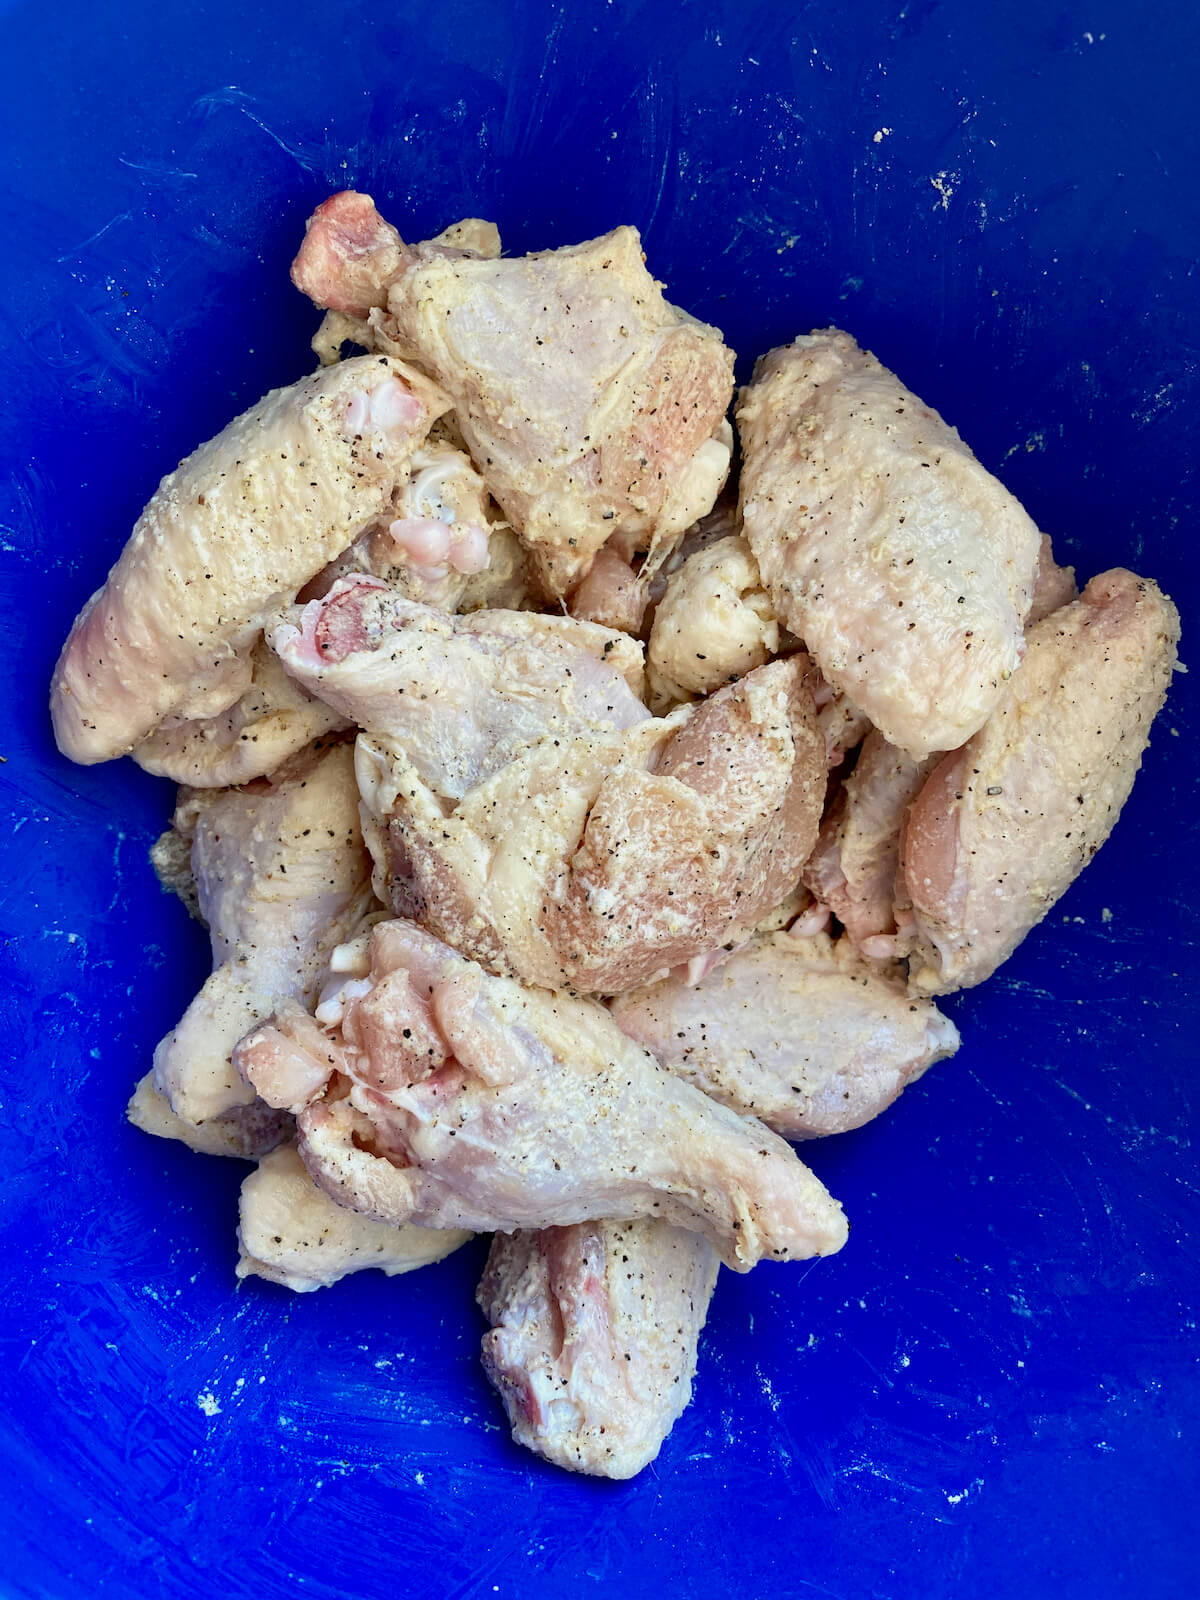 Raw chicken wings tossed with baking powder and seasonings in a blue mixing bowl.